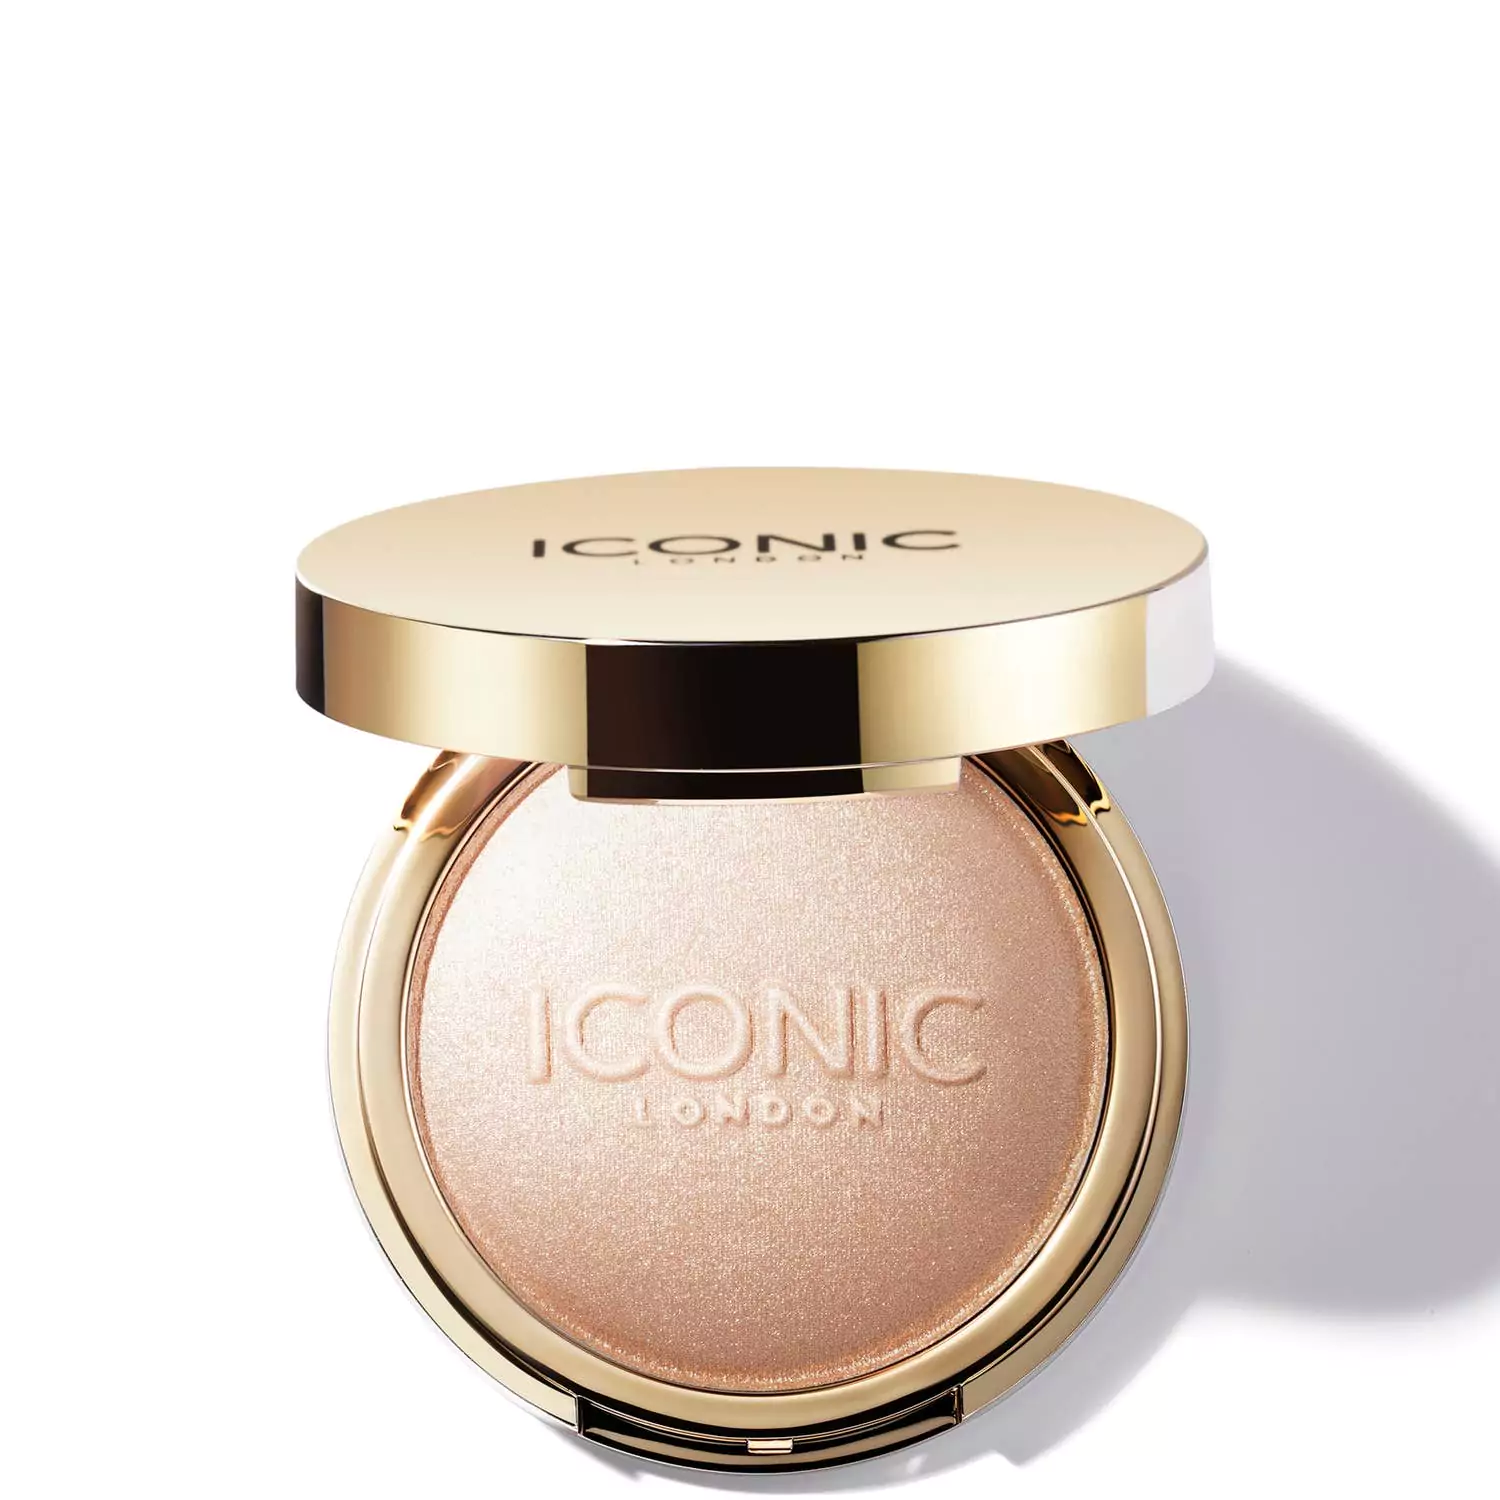 ICONIC London Lit and Luminous Baked Highlighter Discounts and Cashback